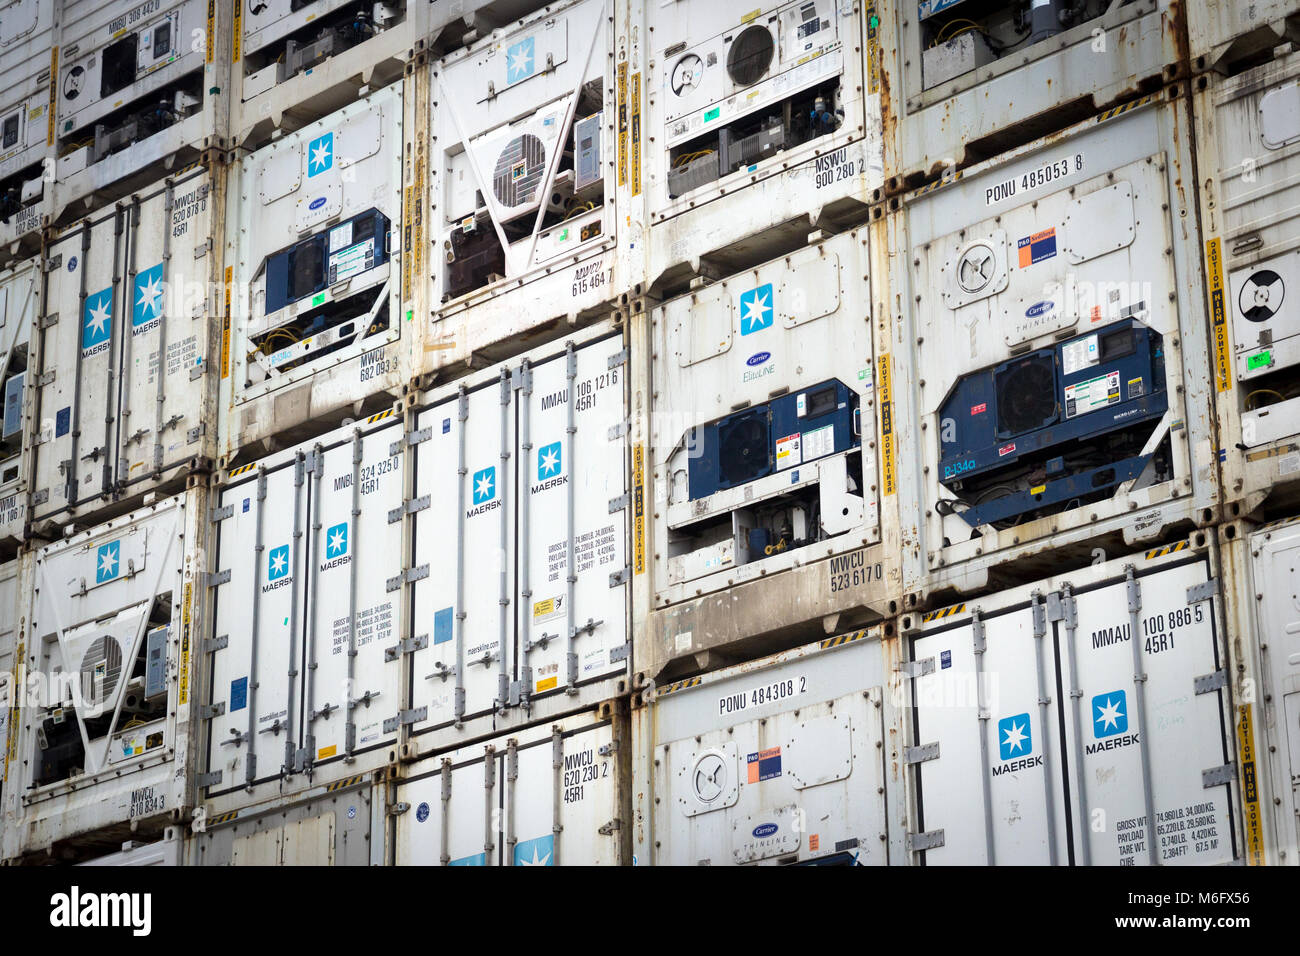 ROTTERDAM, NETHERLANDS - SEP 7, 2012: Refrigerated shipping containers stacked in the Port of Rotterdam. Stock Photo